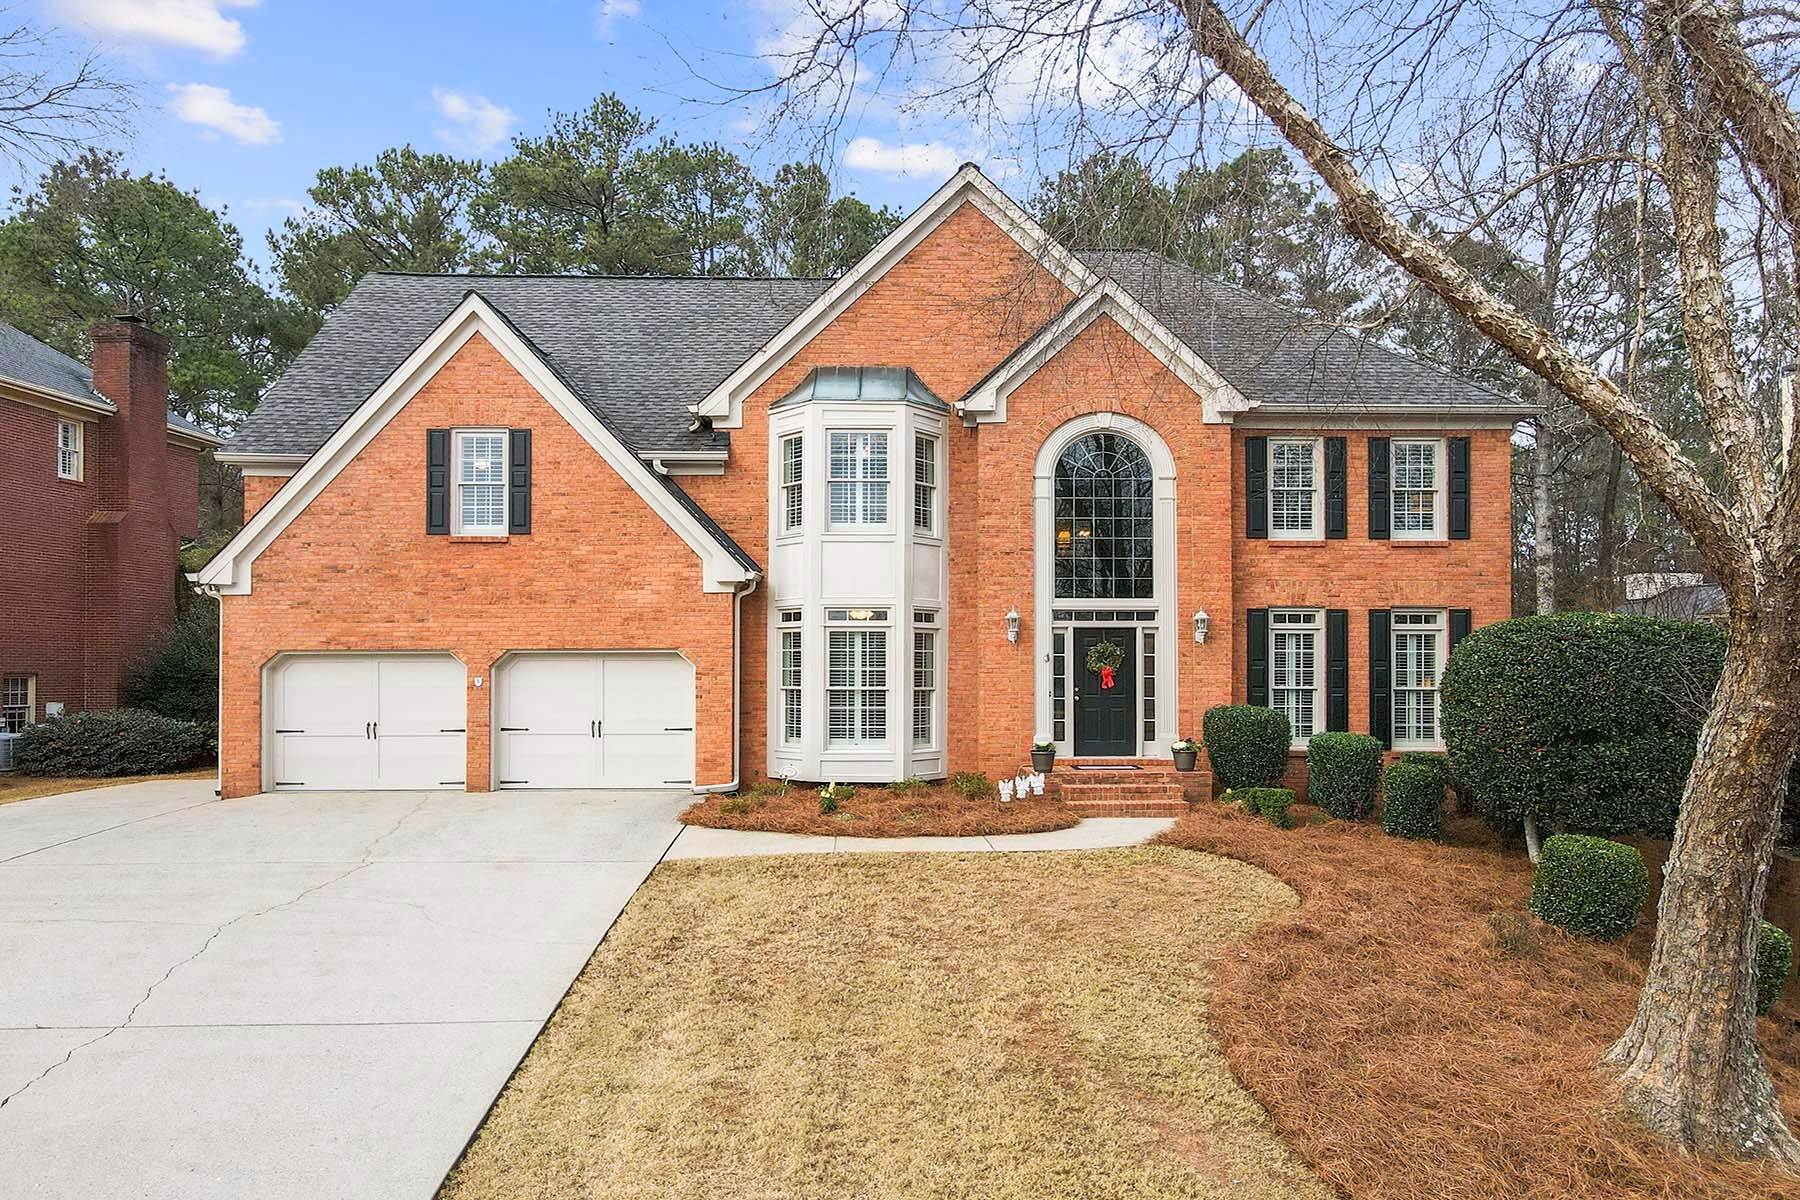 Single Family Homes for Sale at Beautiful and Updated Traditional in Active Swim/Tennis Community 3180 Kingshouse Commons Johns Creek, Georgia 30022 United States